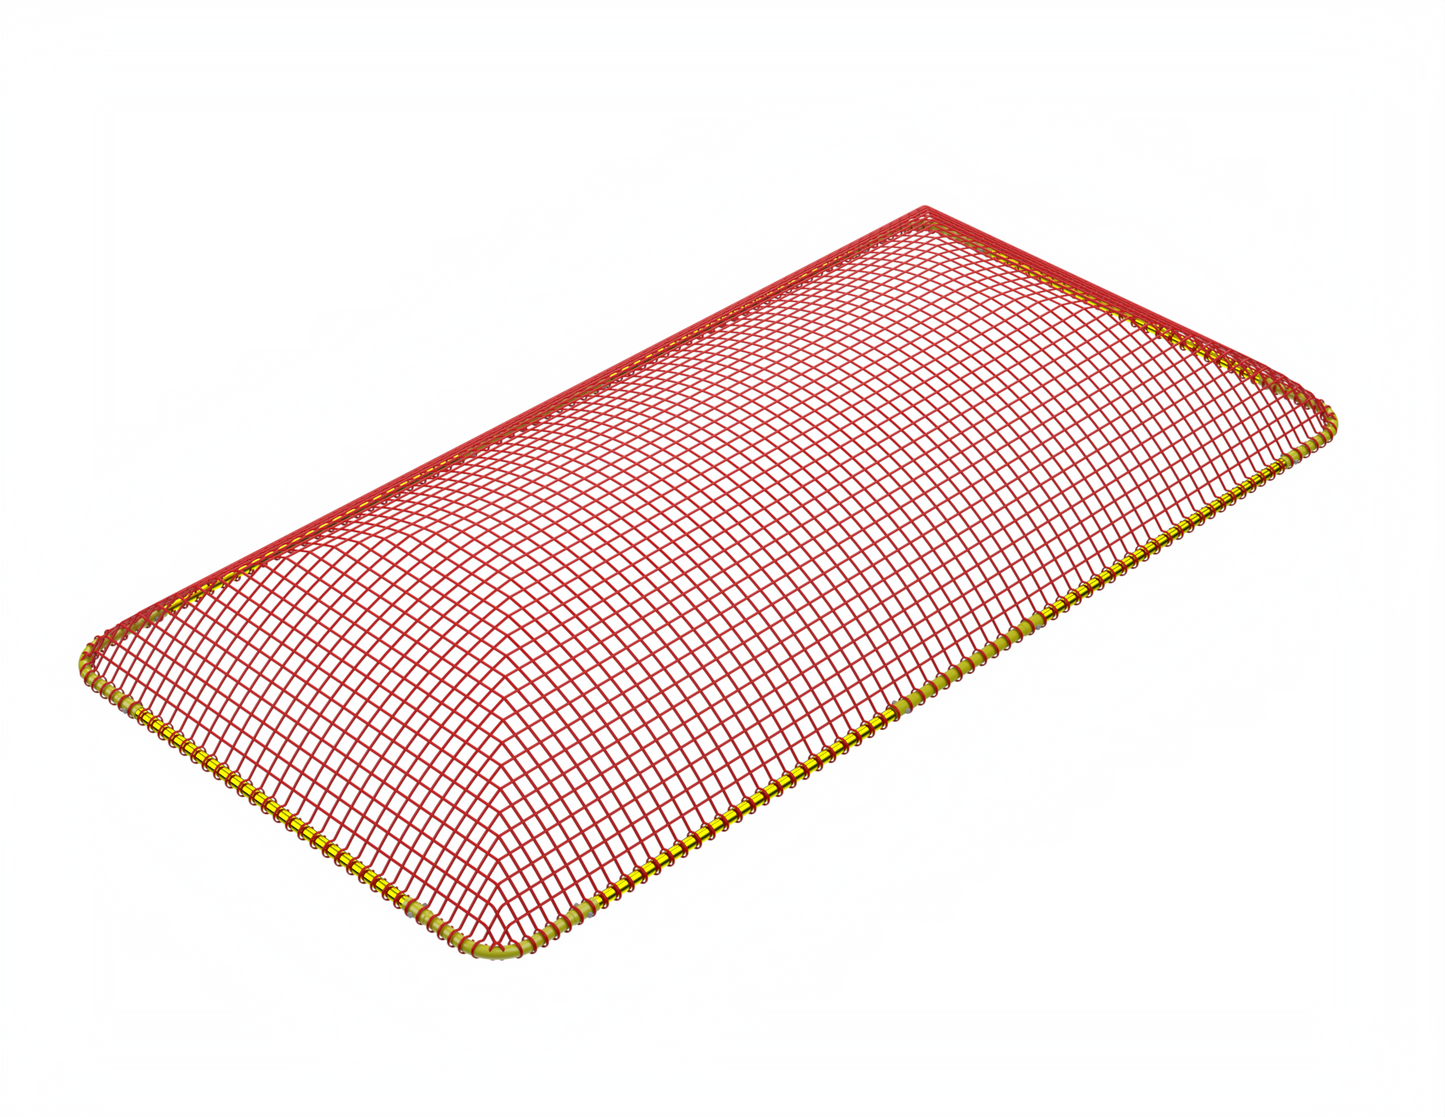 6’ x 12’ Collapsible SKYNET